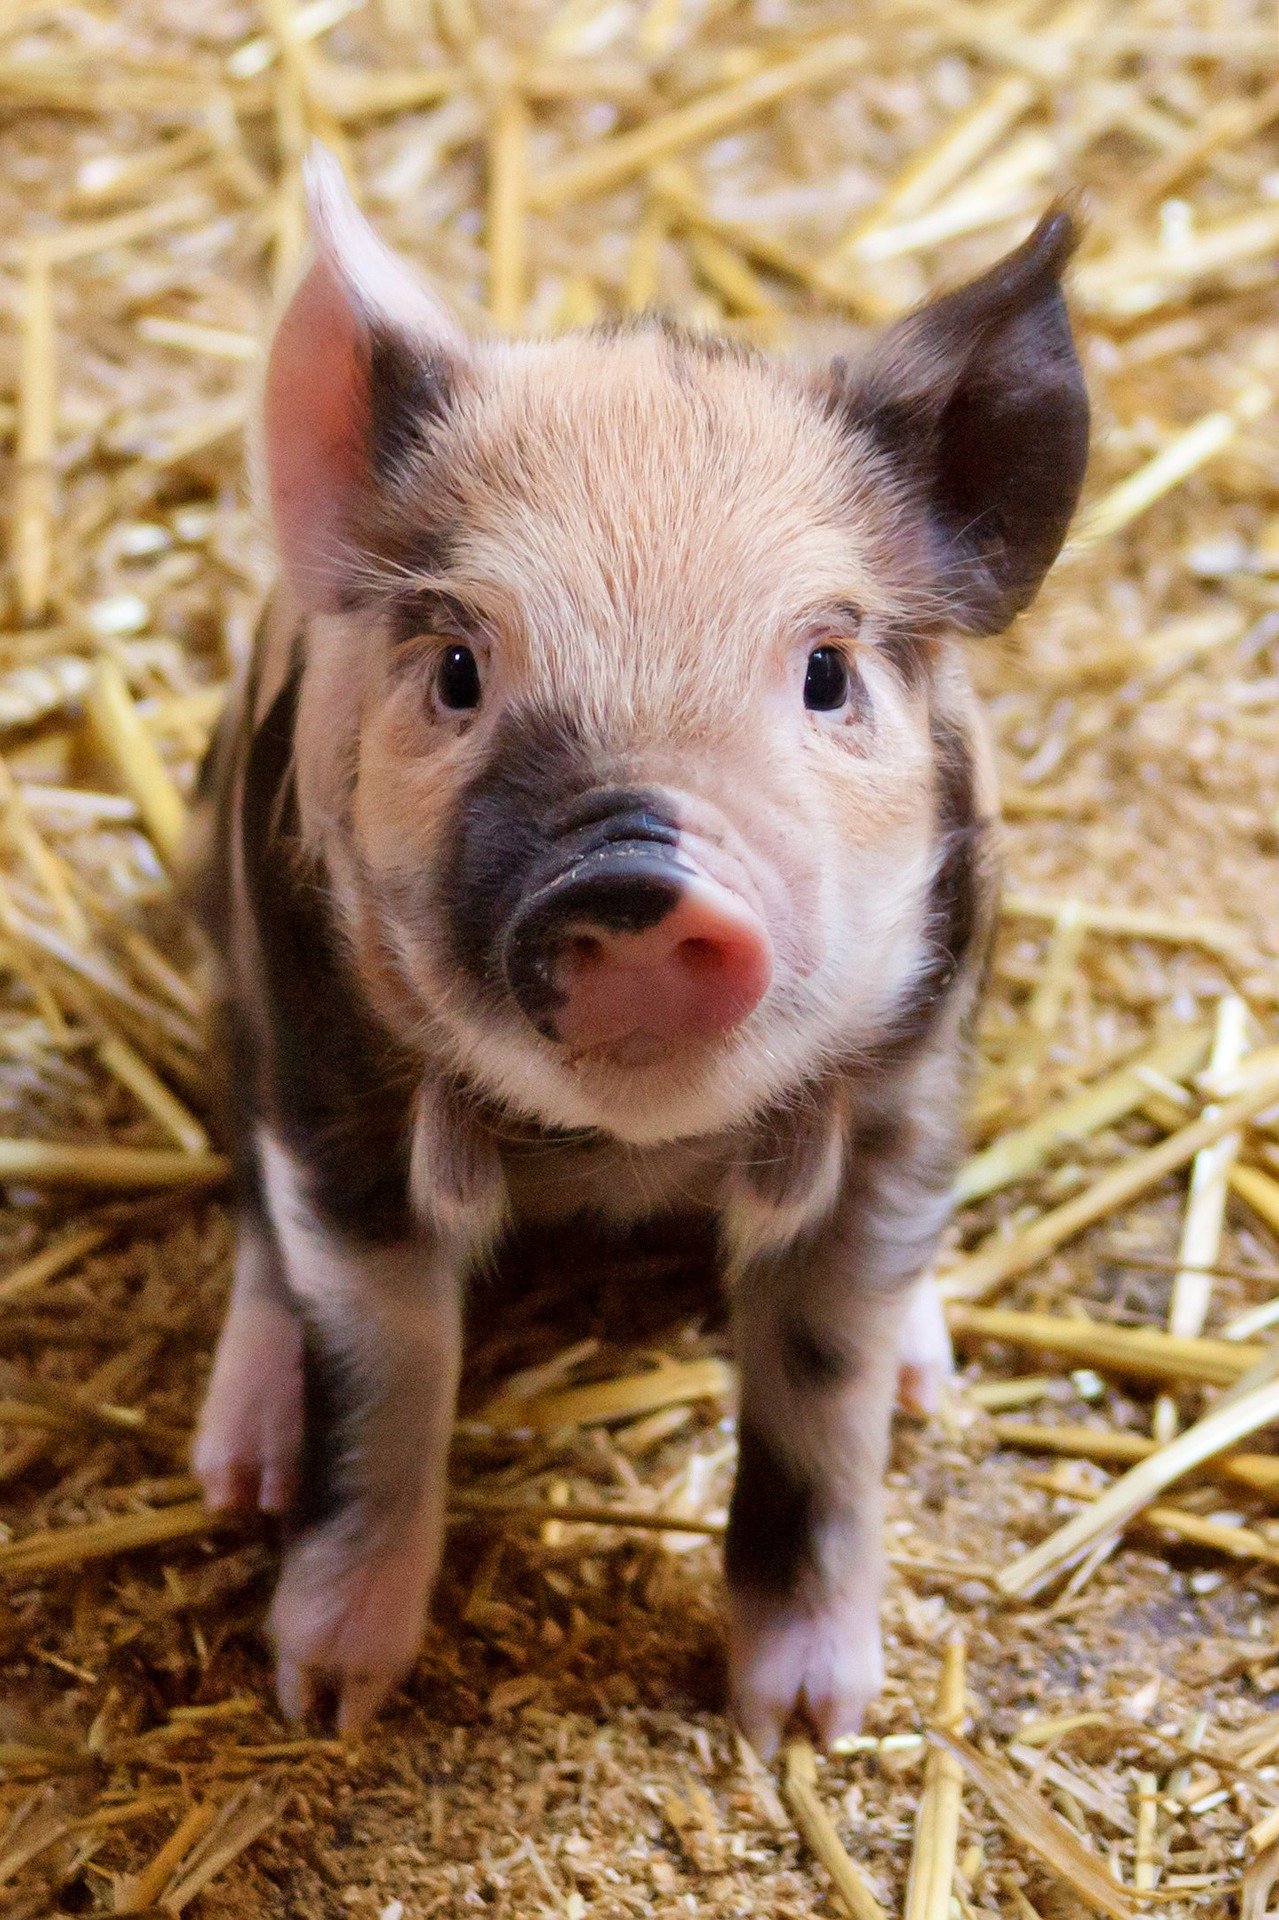 The other farmer offered to take one piglet. | Photo: Pixabay/PublicDomainPictures